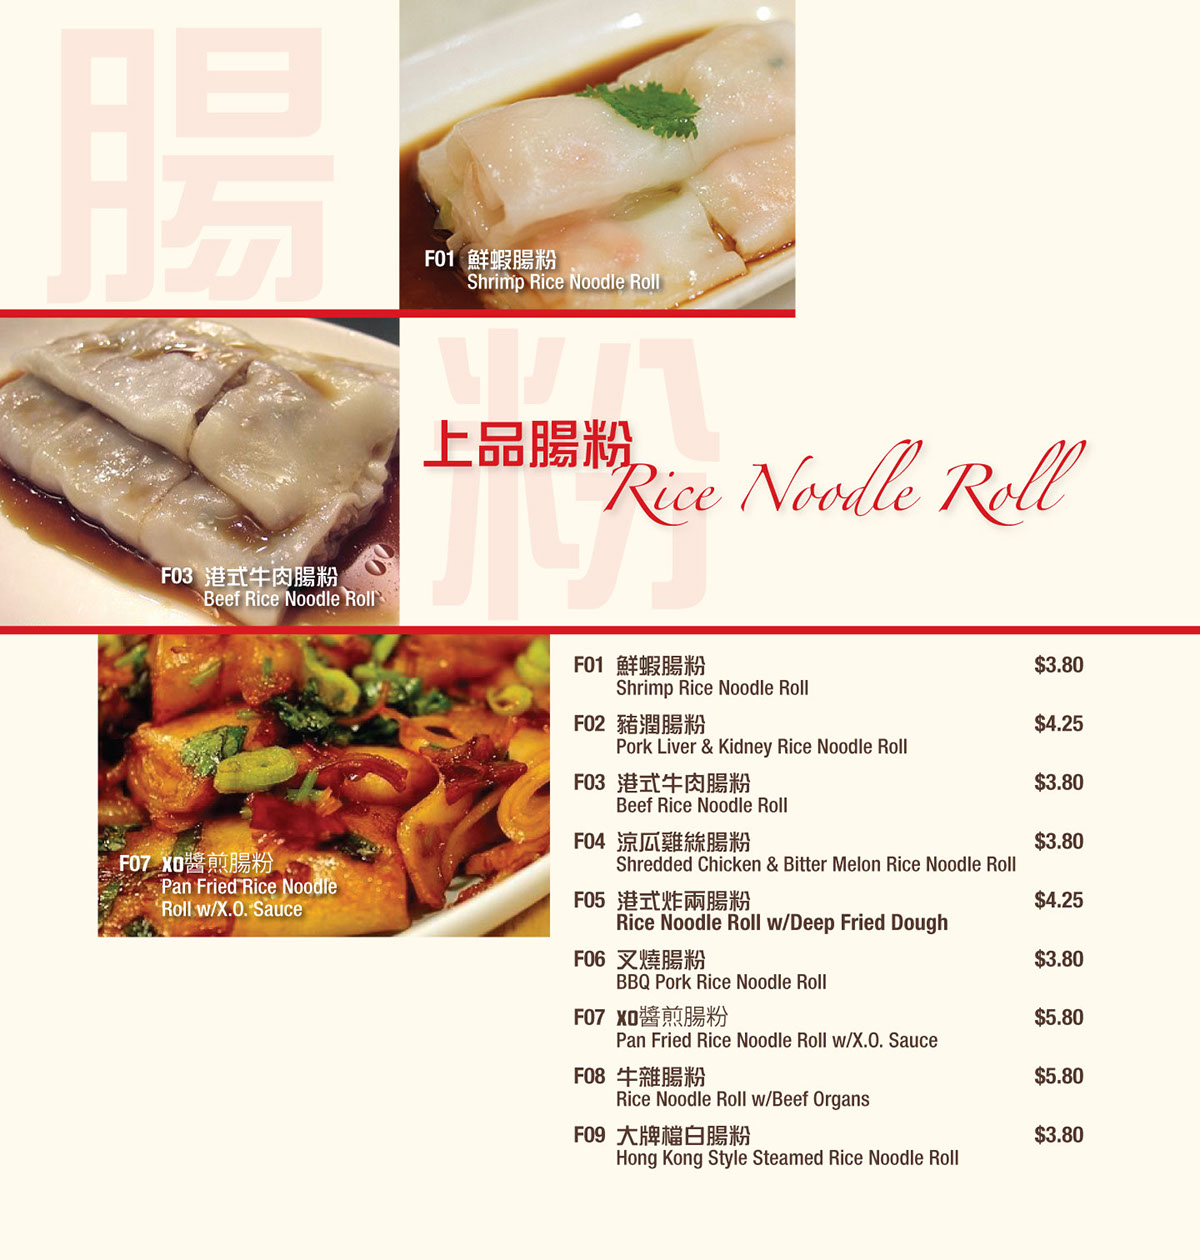 menu art restaurant seafood chinese togo menu logo typesetting creative cover back inside page front